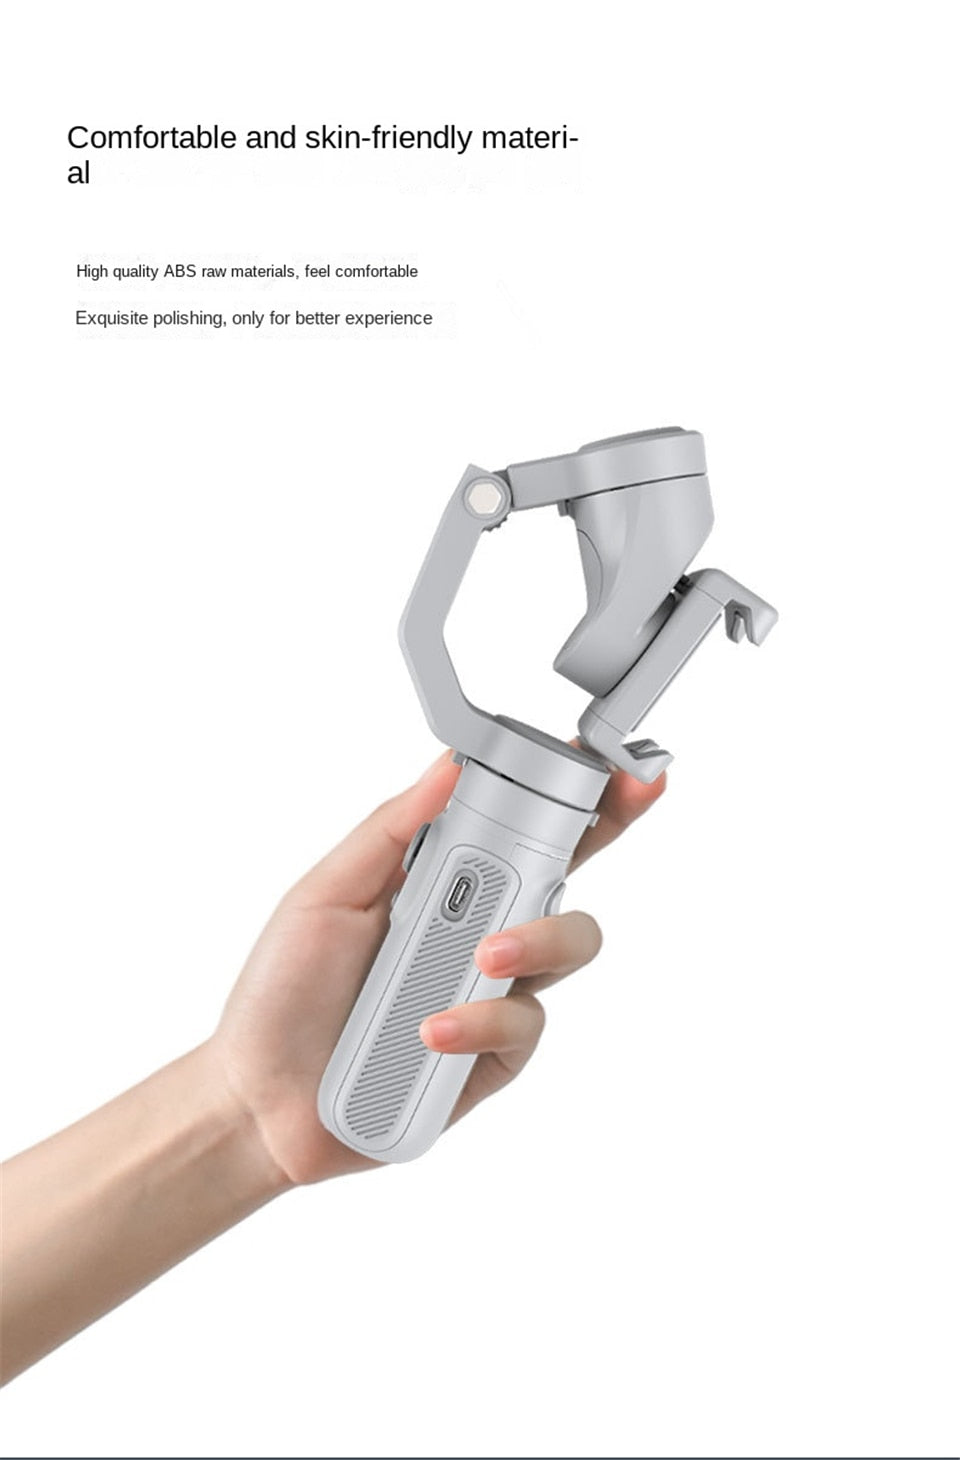 COOL DIER NEW 3-Axis Foldable Handheld Gimbal Stabilizer Cellphone Video Record Vlog Stabilizer for iPhone 14 Xiaomi Smartphone